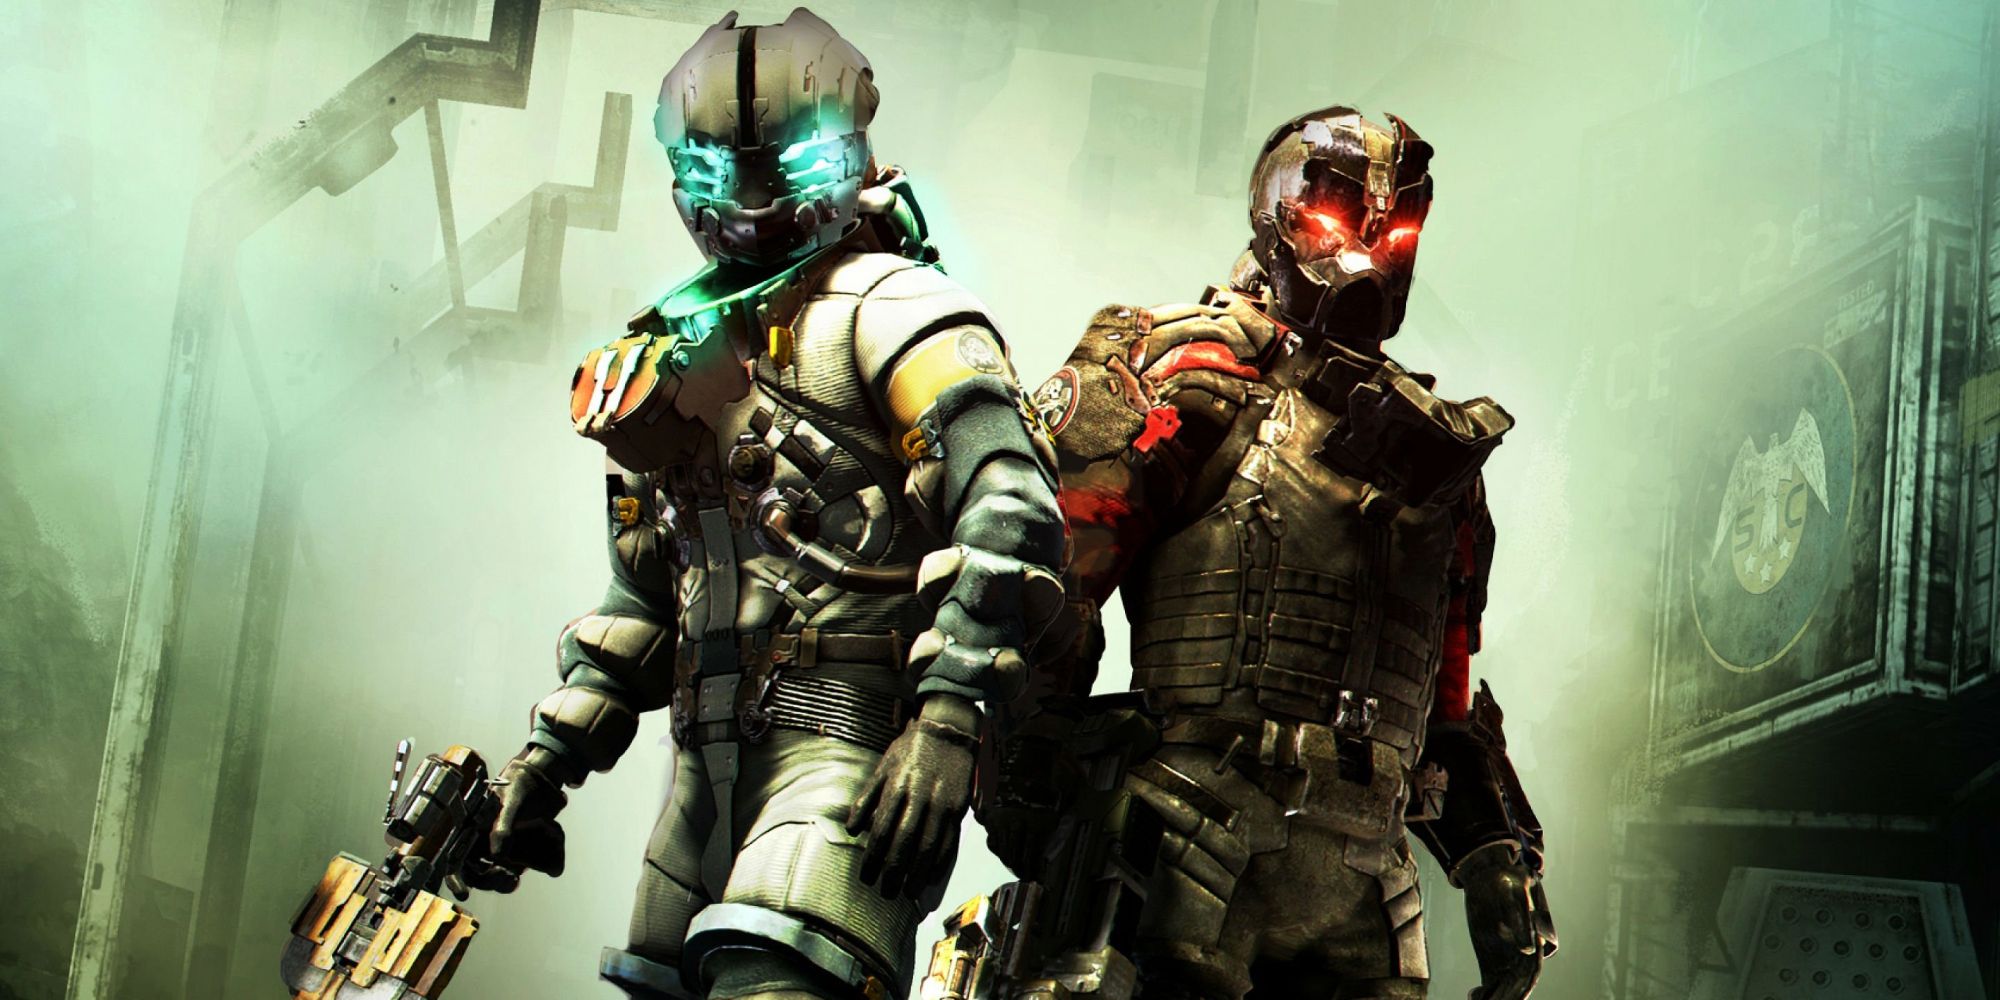 dead space 3 coop trophies two controllers